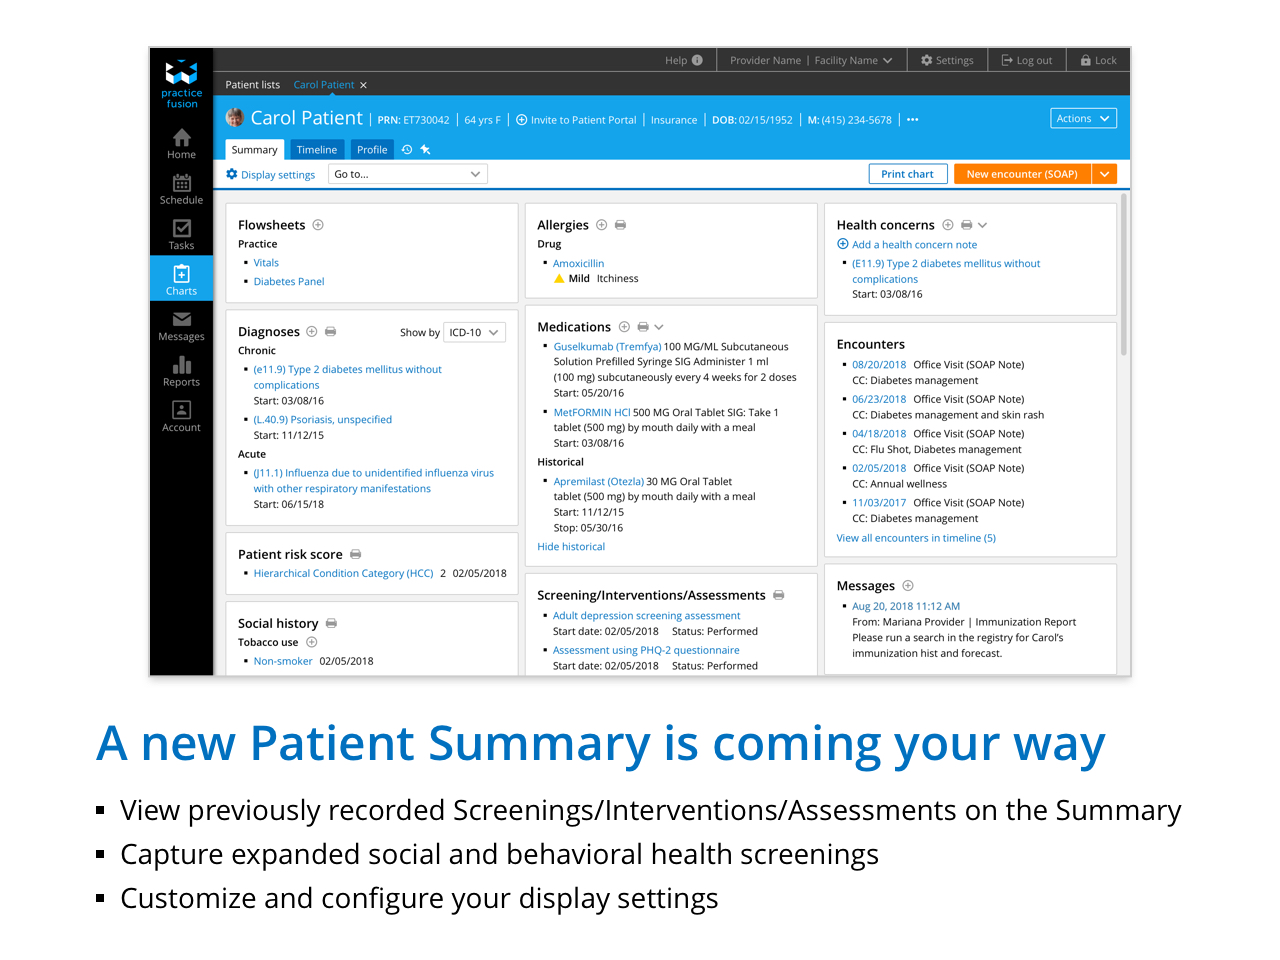 View previously recorded Screening/Interventions/Assessments on the Summary - Capture expanded social and behavioral health screenings - Customize and configure your display settings